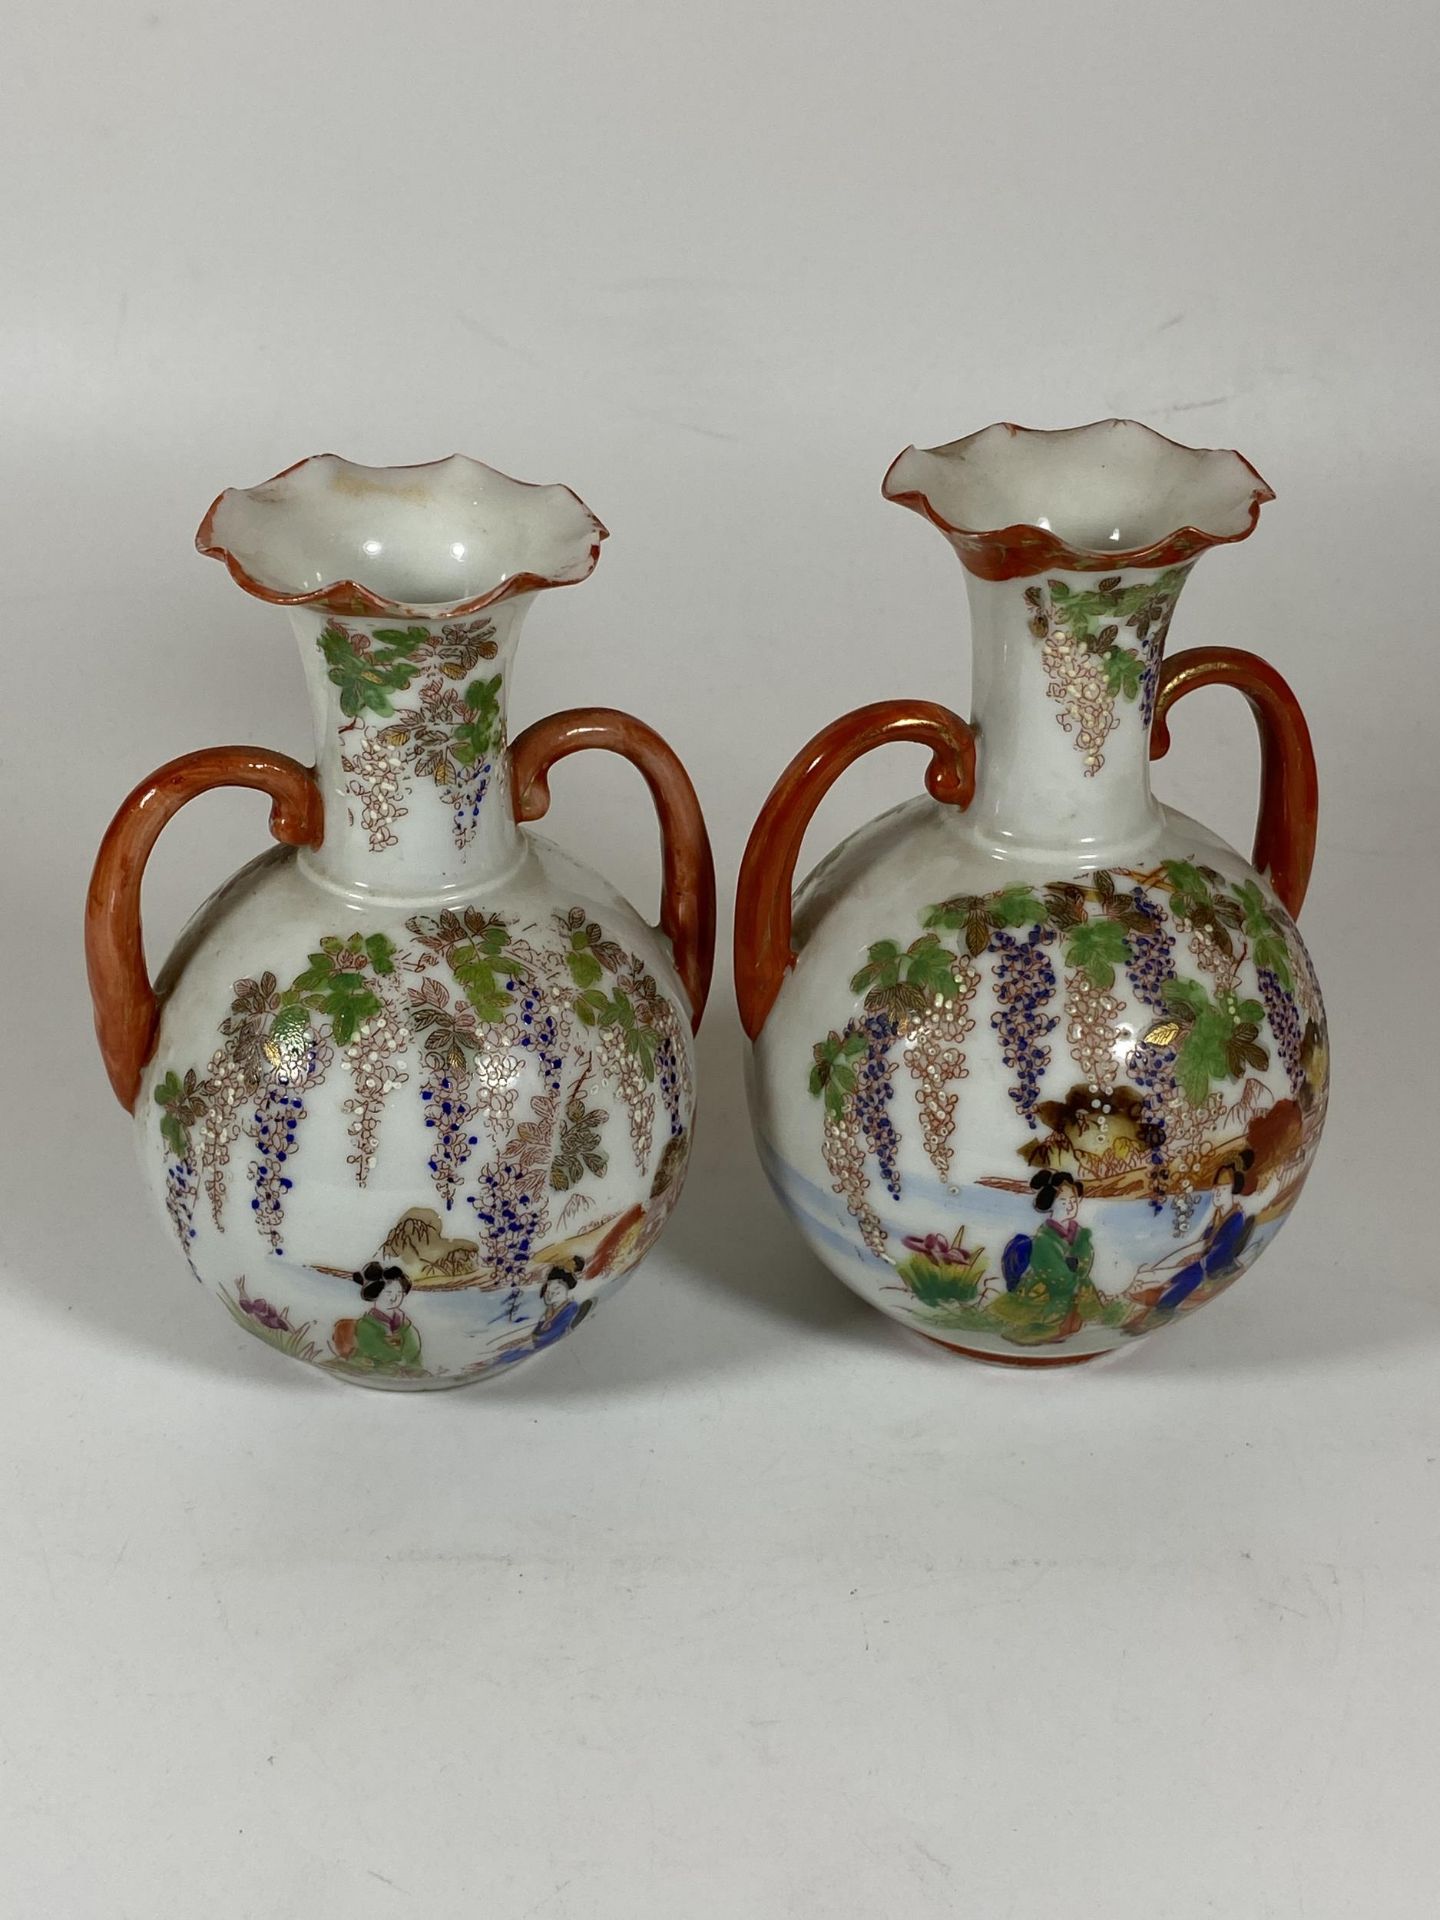 A PAIR OF JAPANESE TWIN HANDLED PORCELAIN VASES WITH LAKESIDE SCENE, HEIGHT 14CM - Image 4 of 6